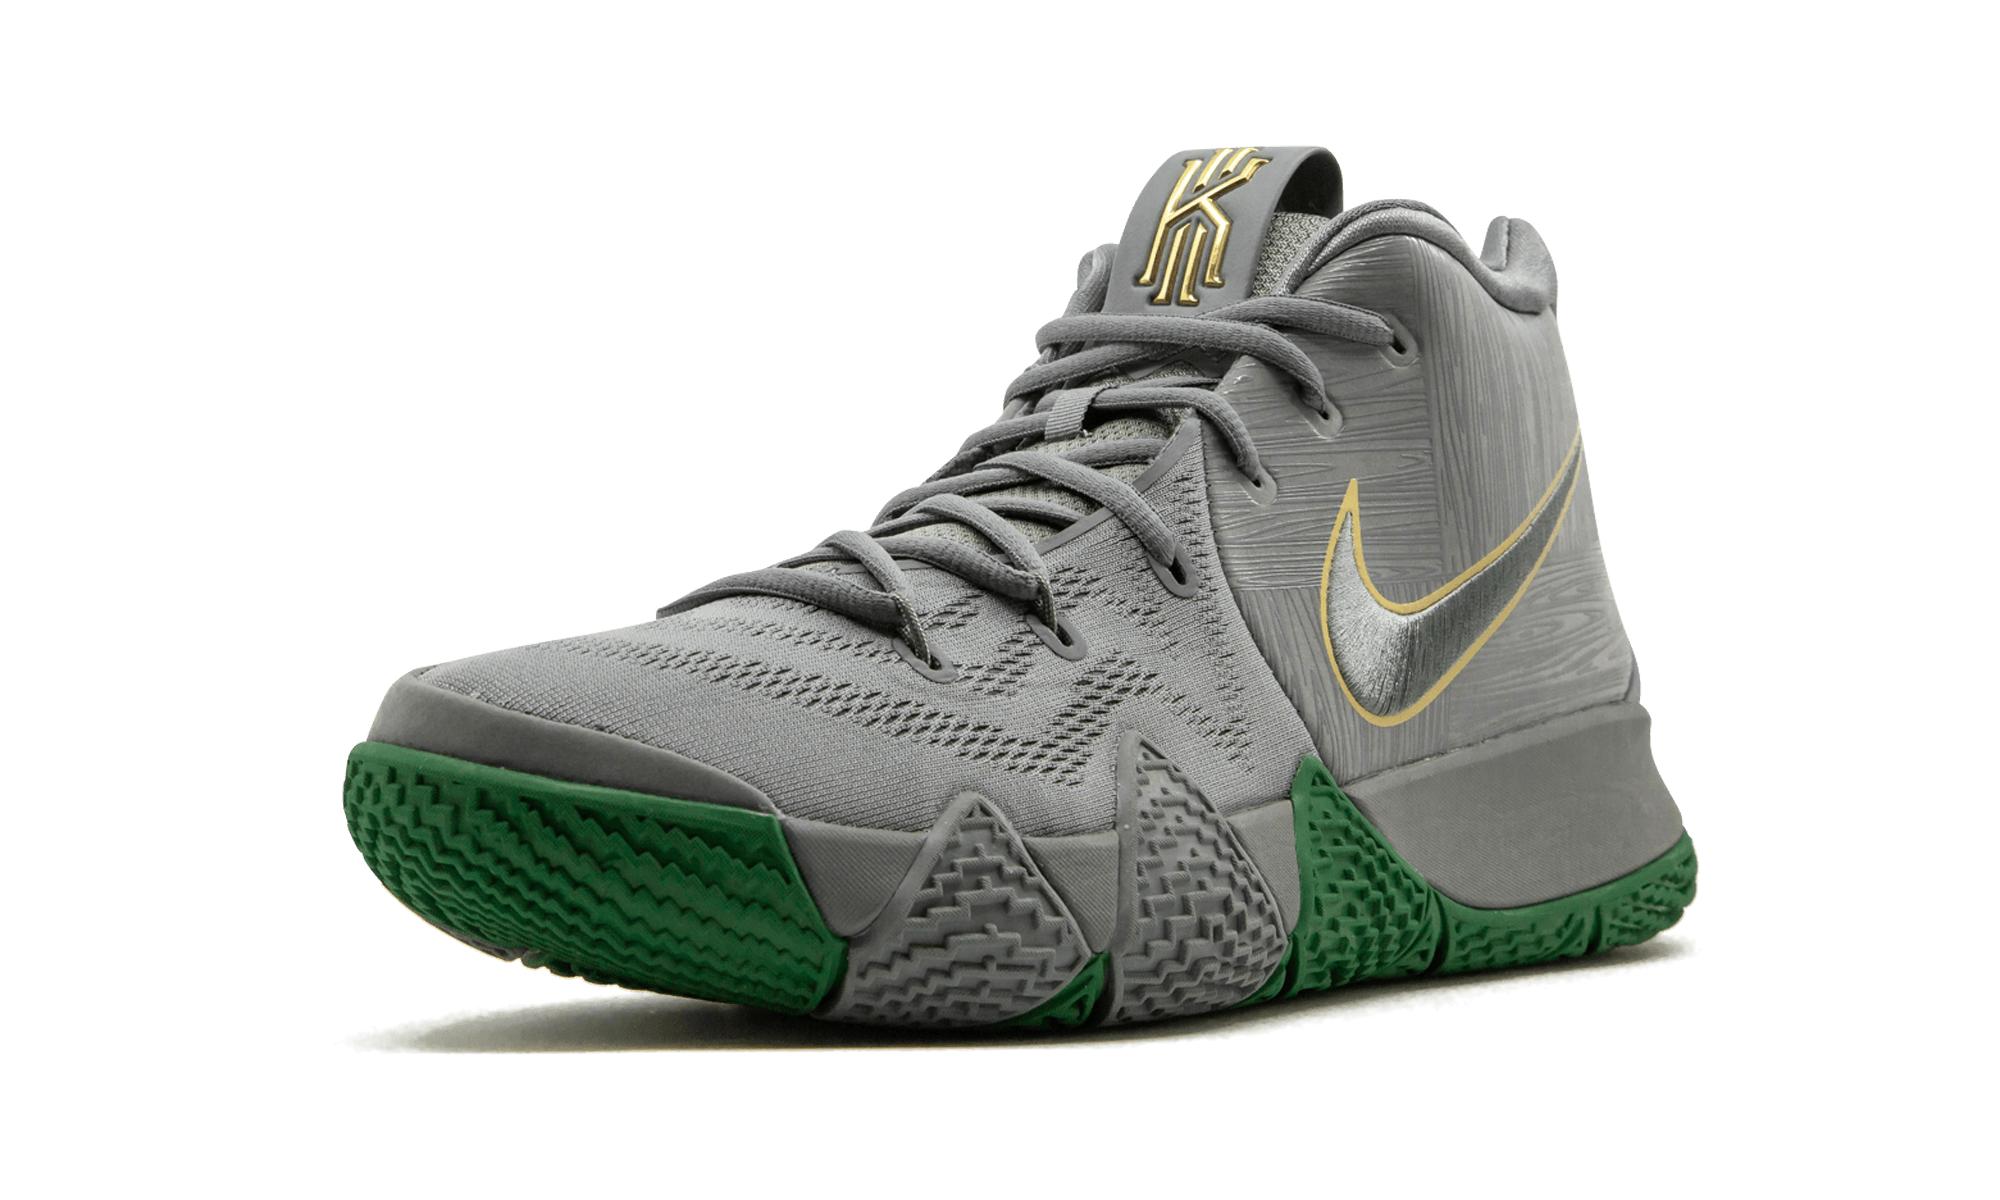 grey and green kyrie 4